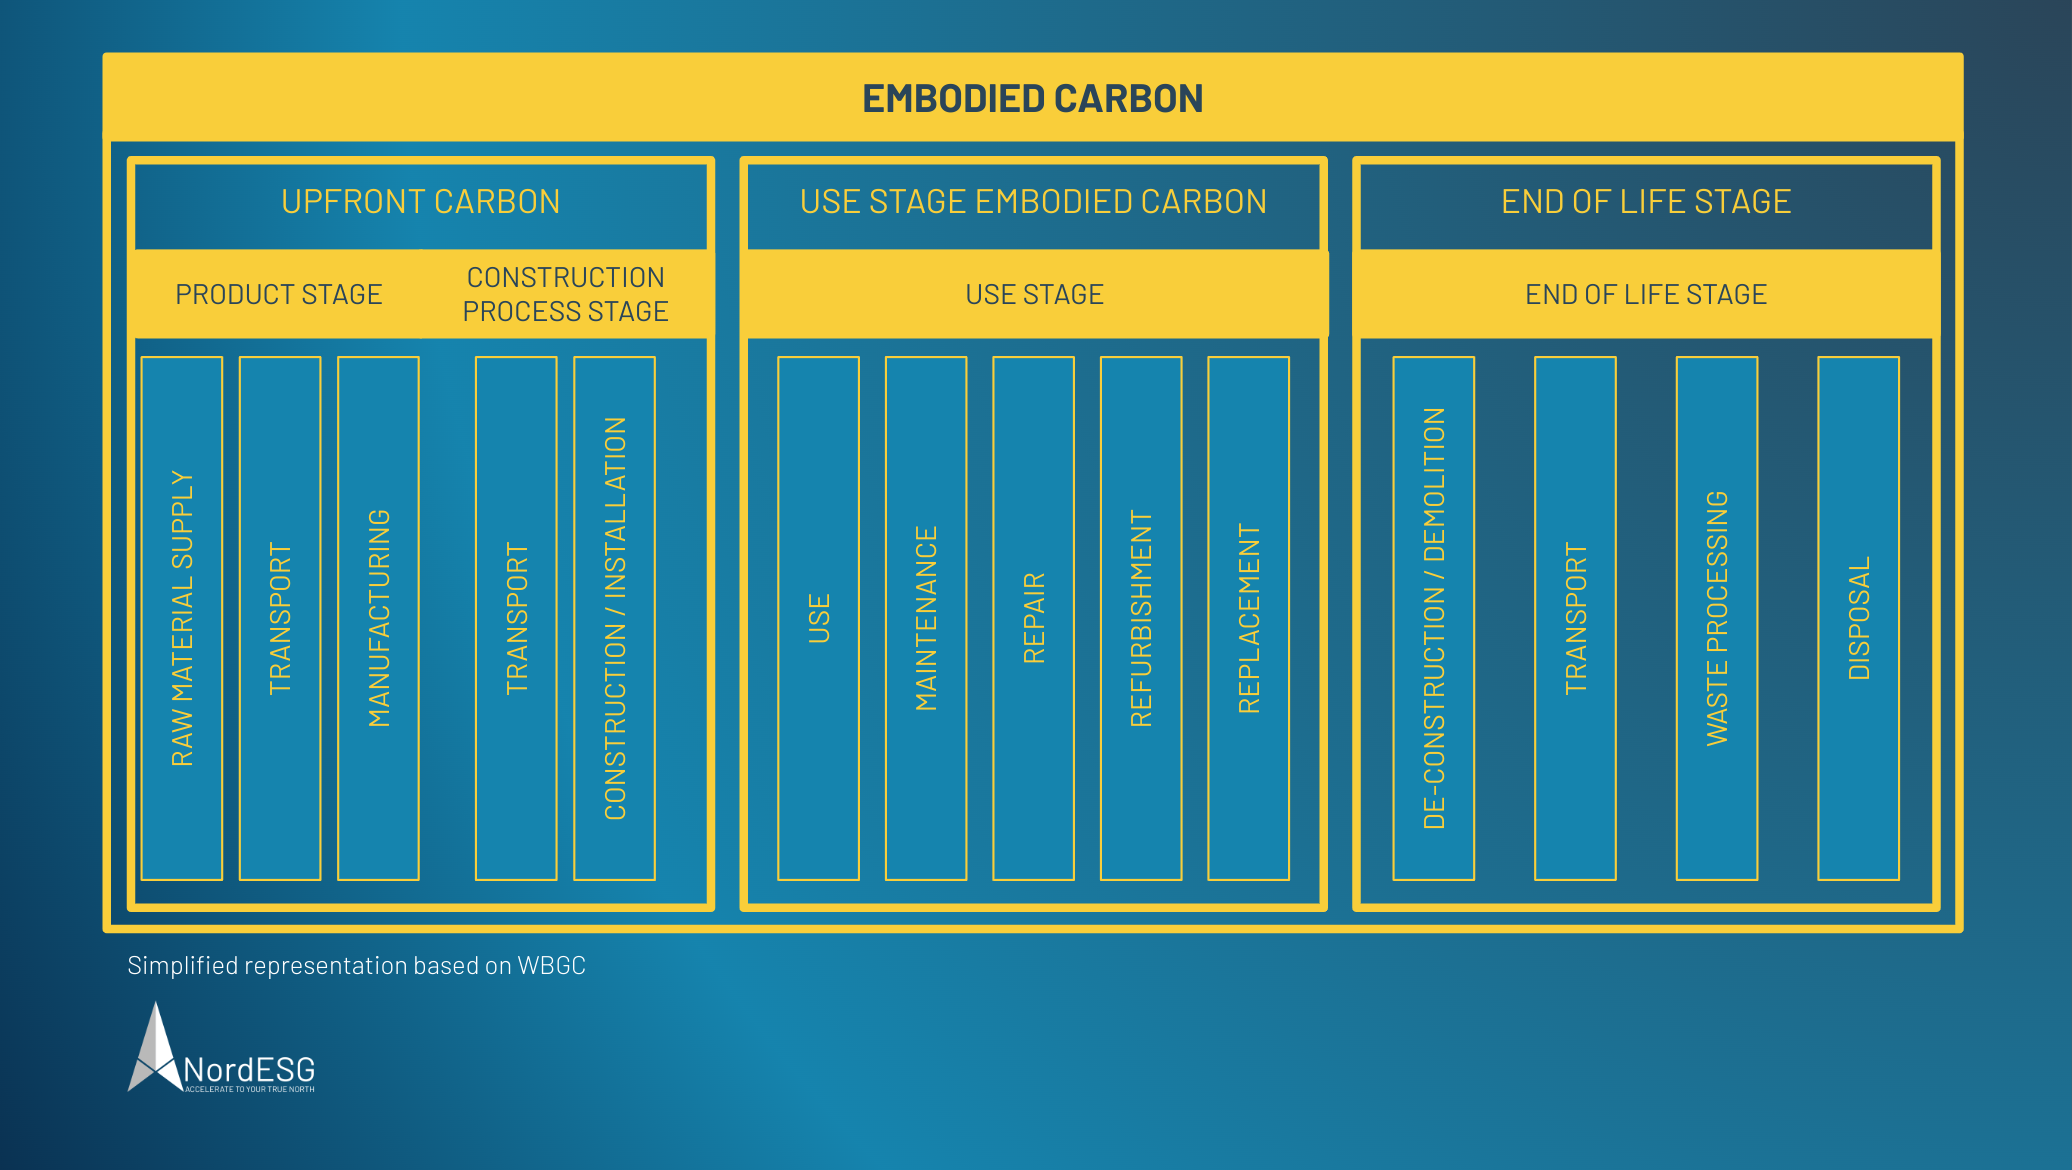 Embodied Carbon Use Stages